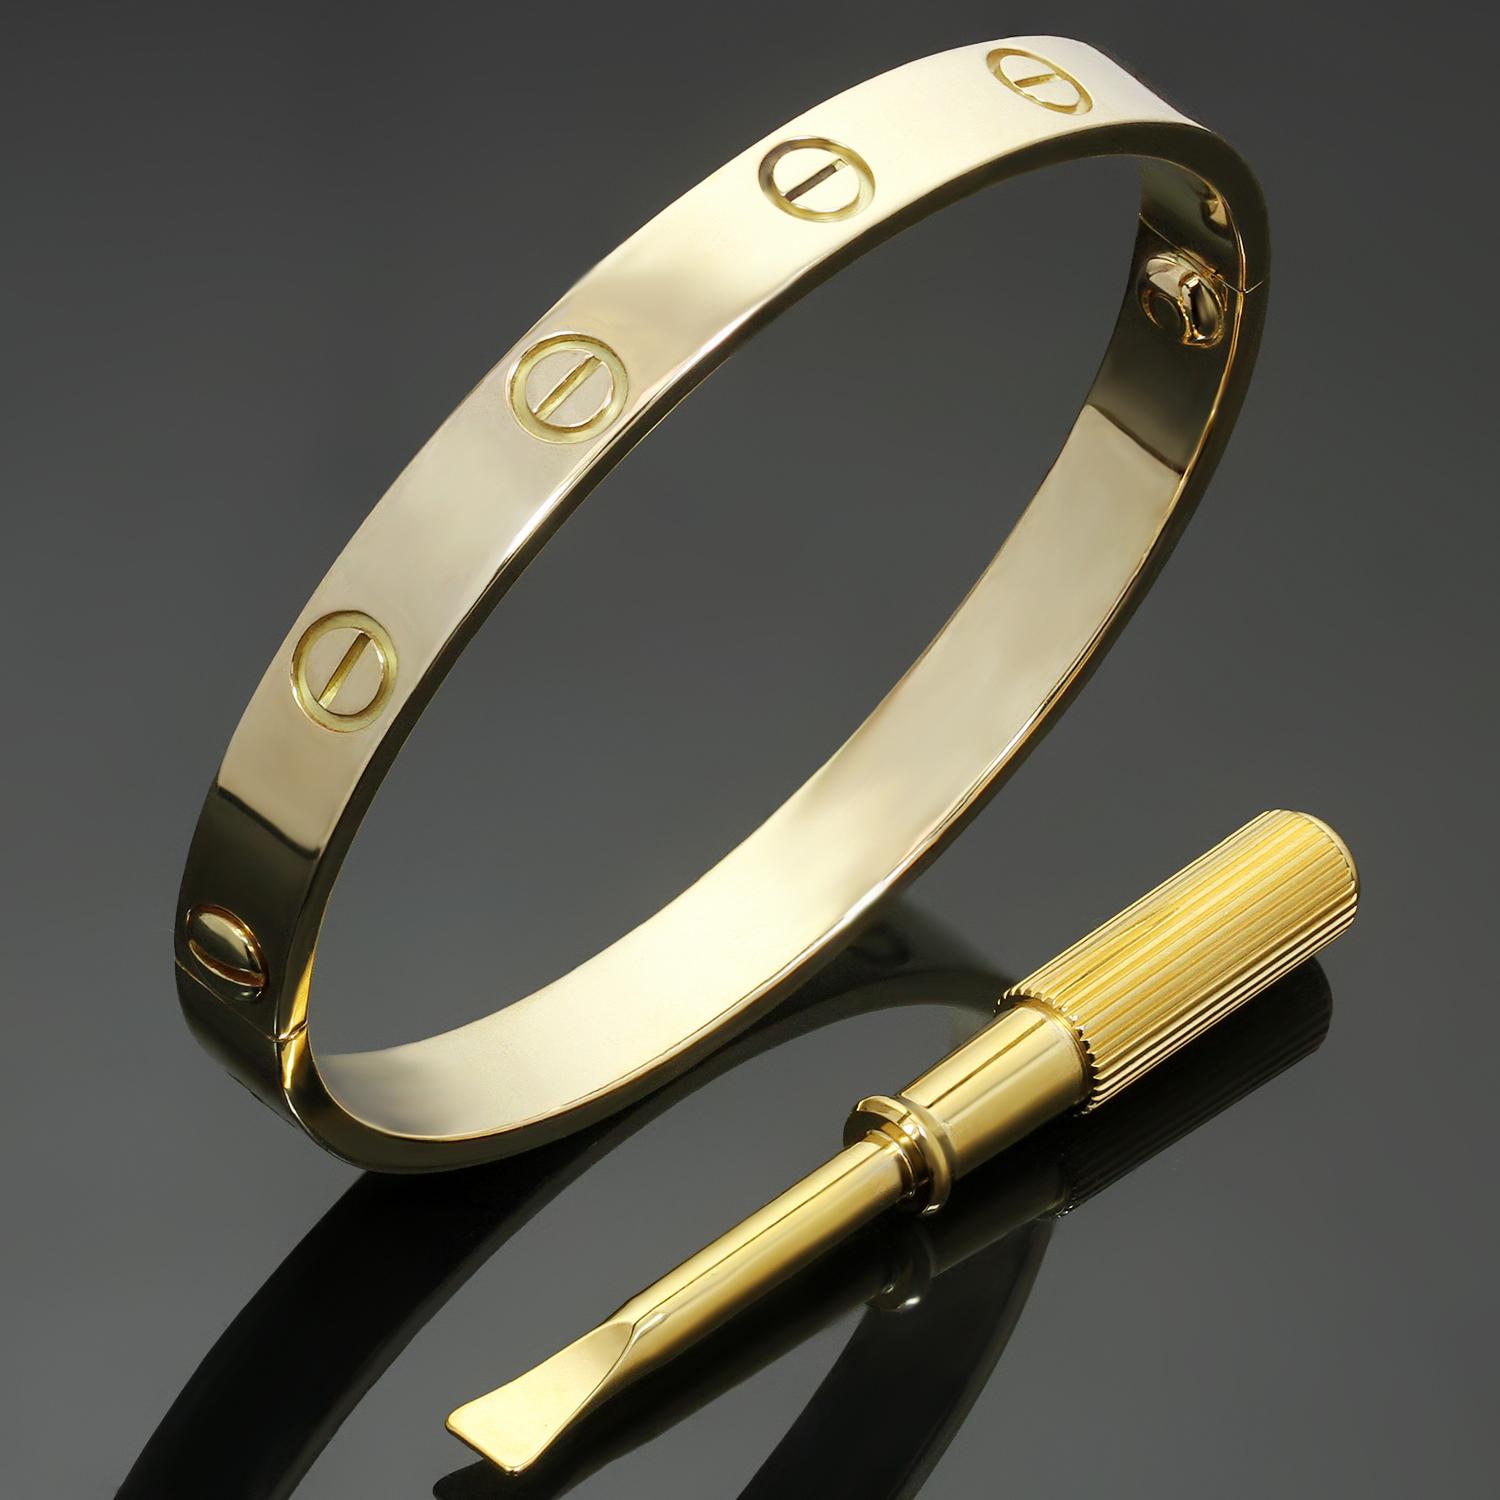 This classic Cartier bangle from the iconic Love collection is crafted in 18k yellow gold and completed with the Cartier pouch, screwdriver and Cartier service receipt. . This bracelet is a size 16. Made in France circa 2010s. Measurements: 0.23